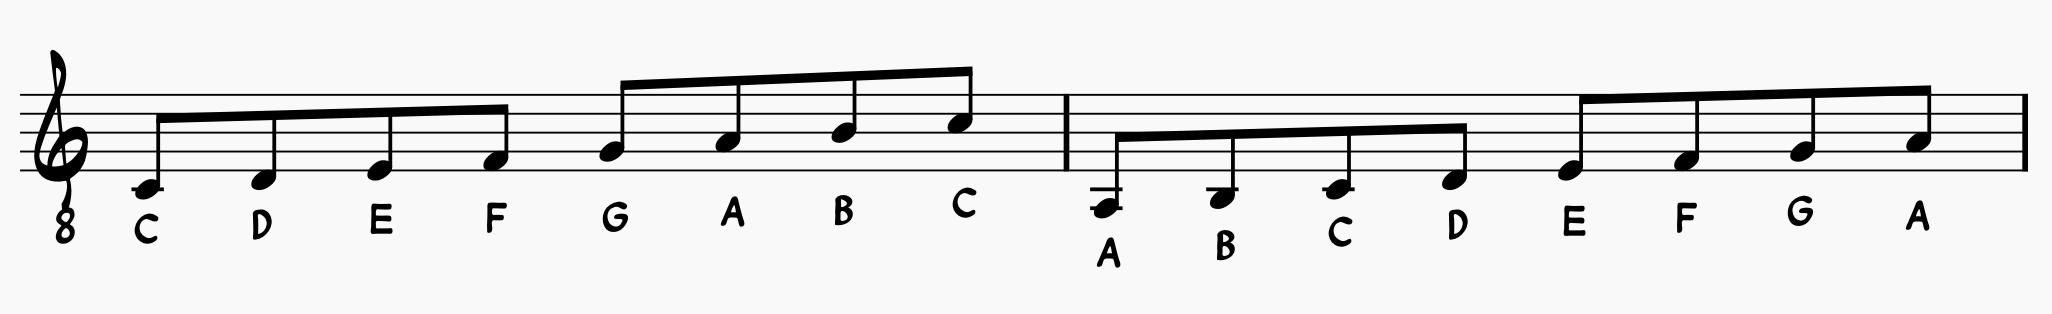 Blues Scale Guide: C major scale and A natural minor scale share the same sequence of notes